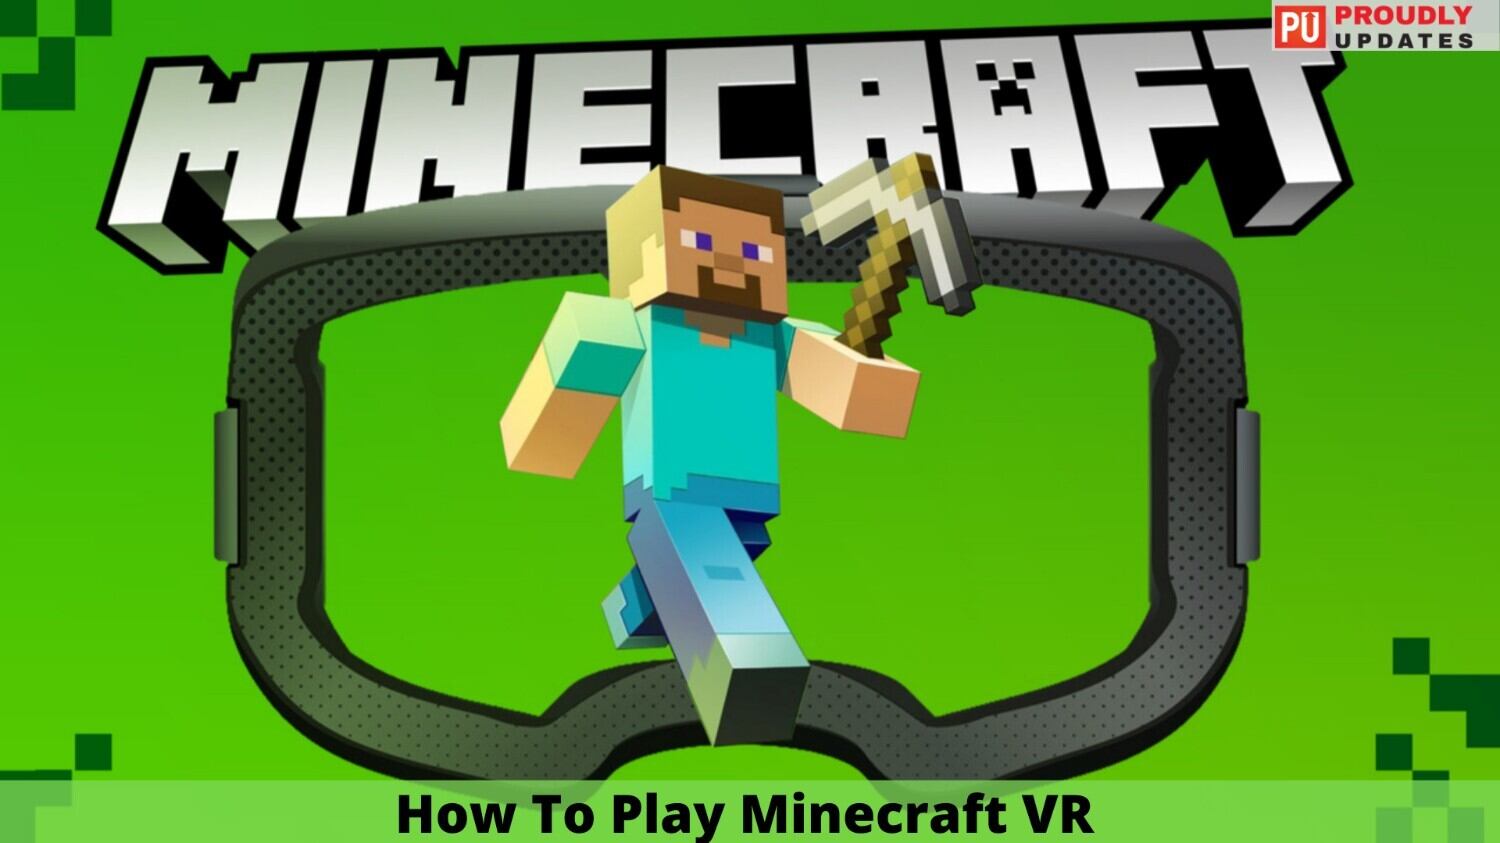 How To Play Minecraft VR